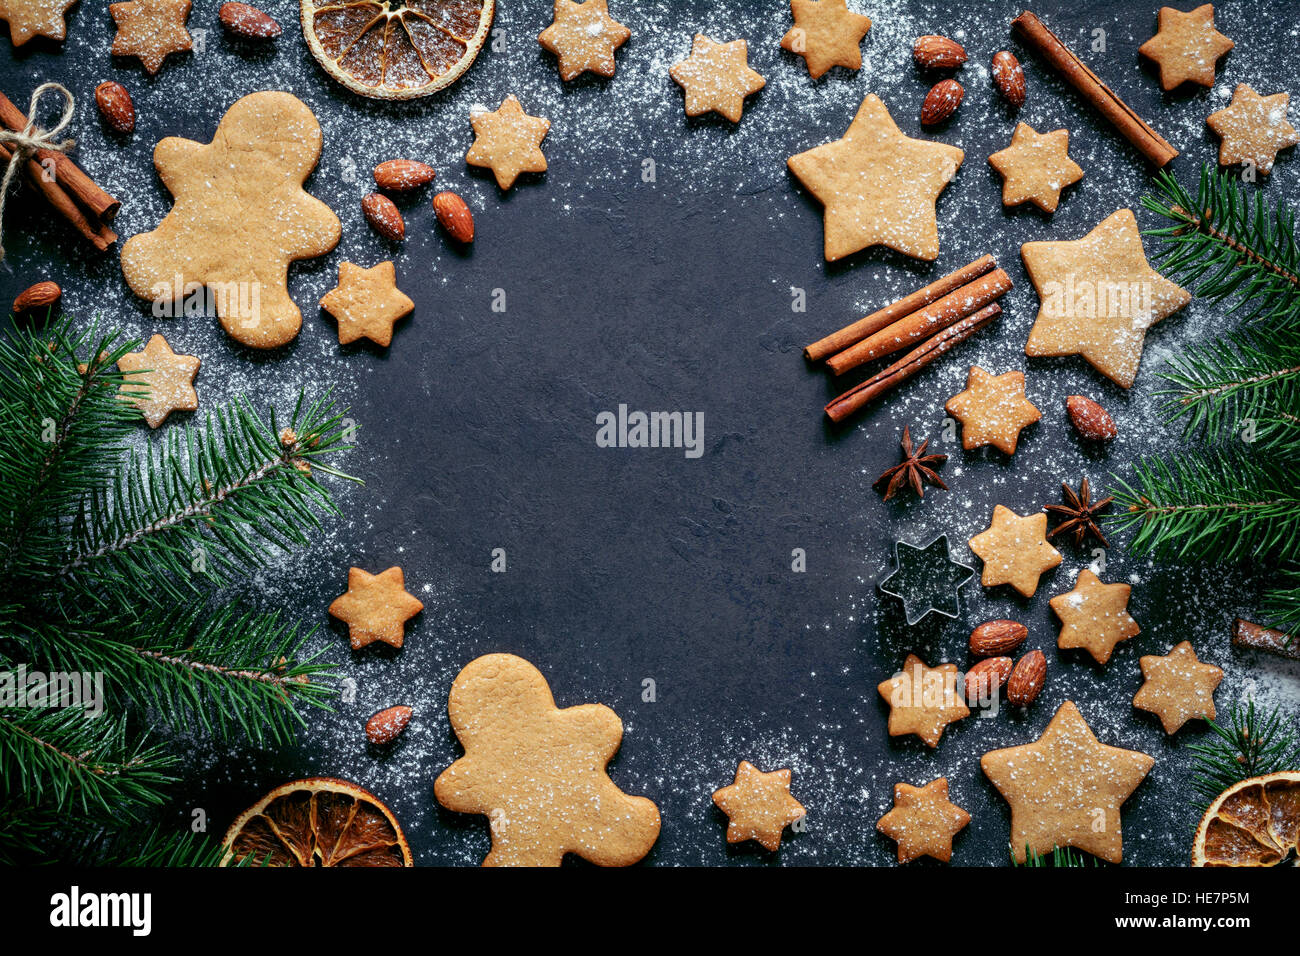 Christmas or New Year background with gingerbread cookies, gingerbread man cookies, stars, spices, cinnamon, fir tree and decor Stock Photo